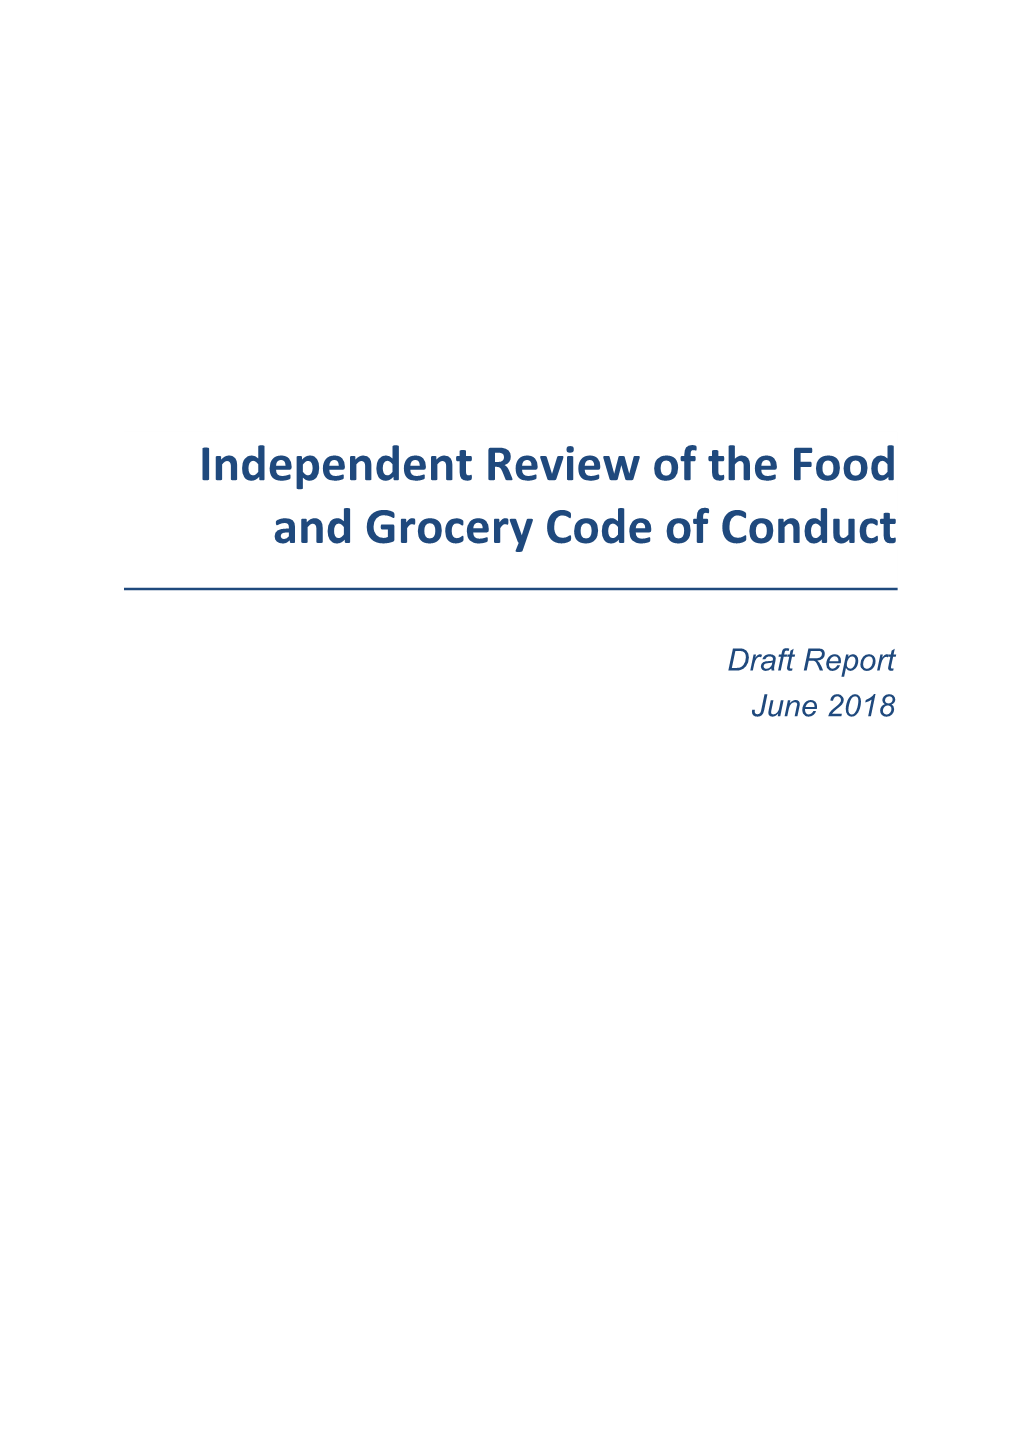 Draft Report: Independent Review of the Food and Grocery Code of Conduct